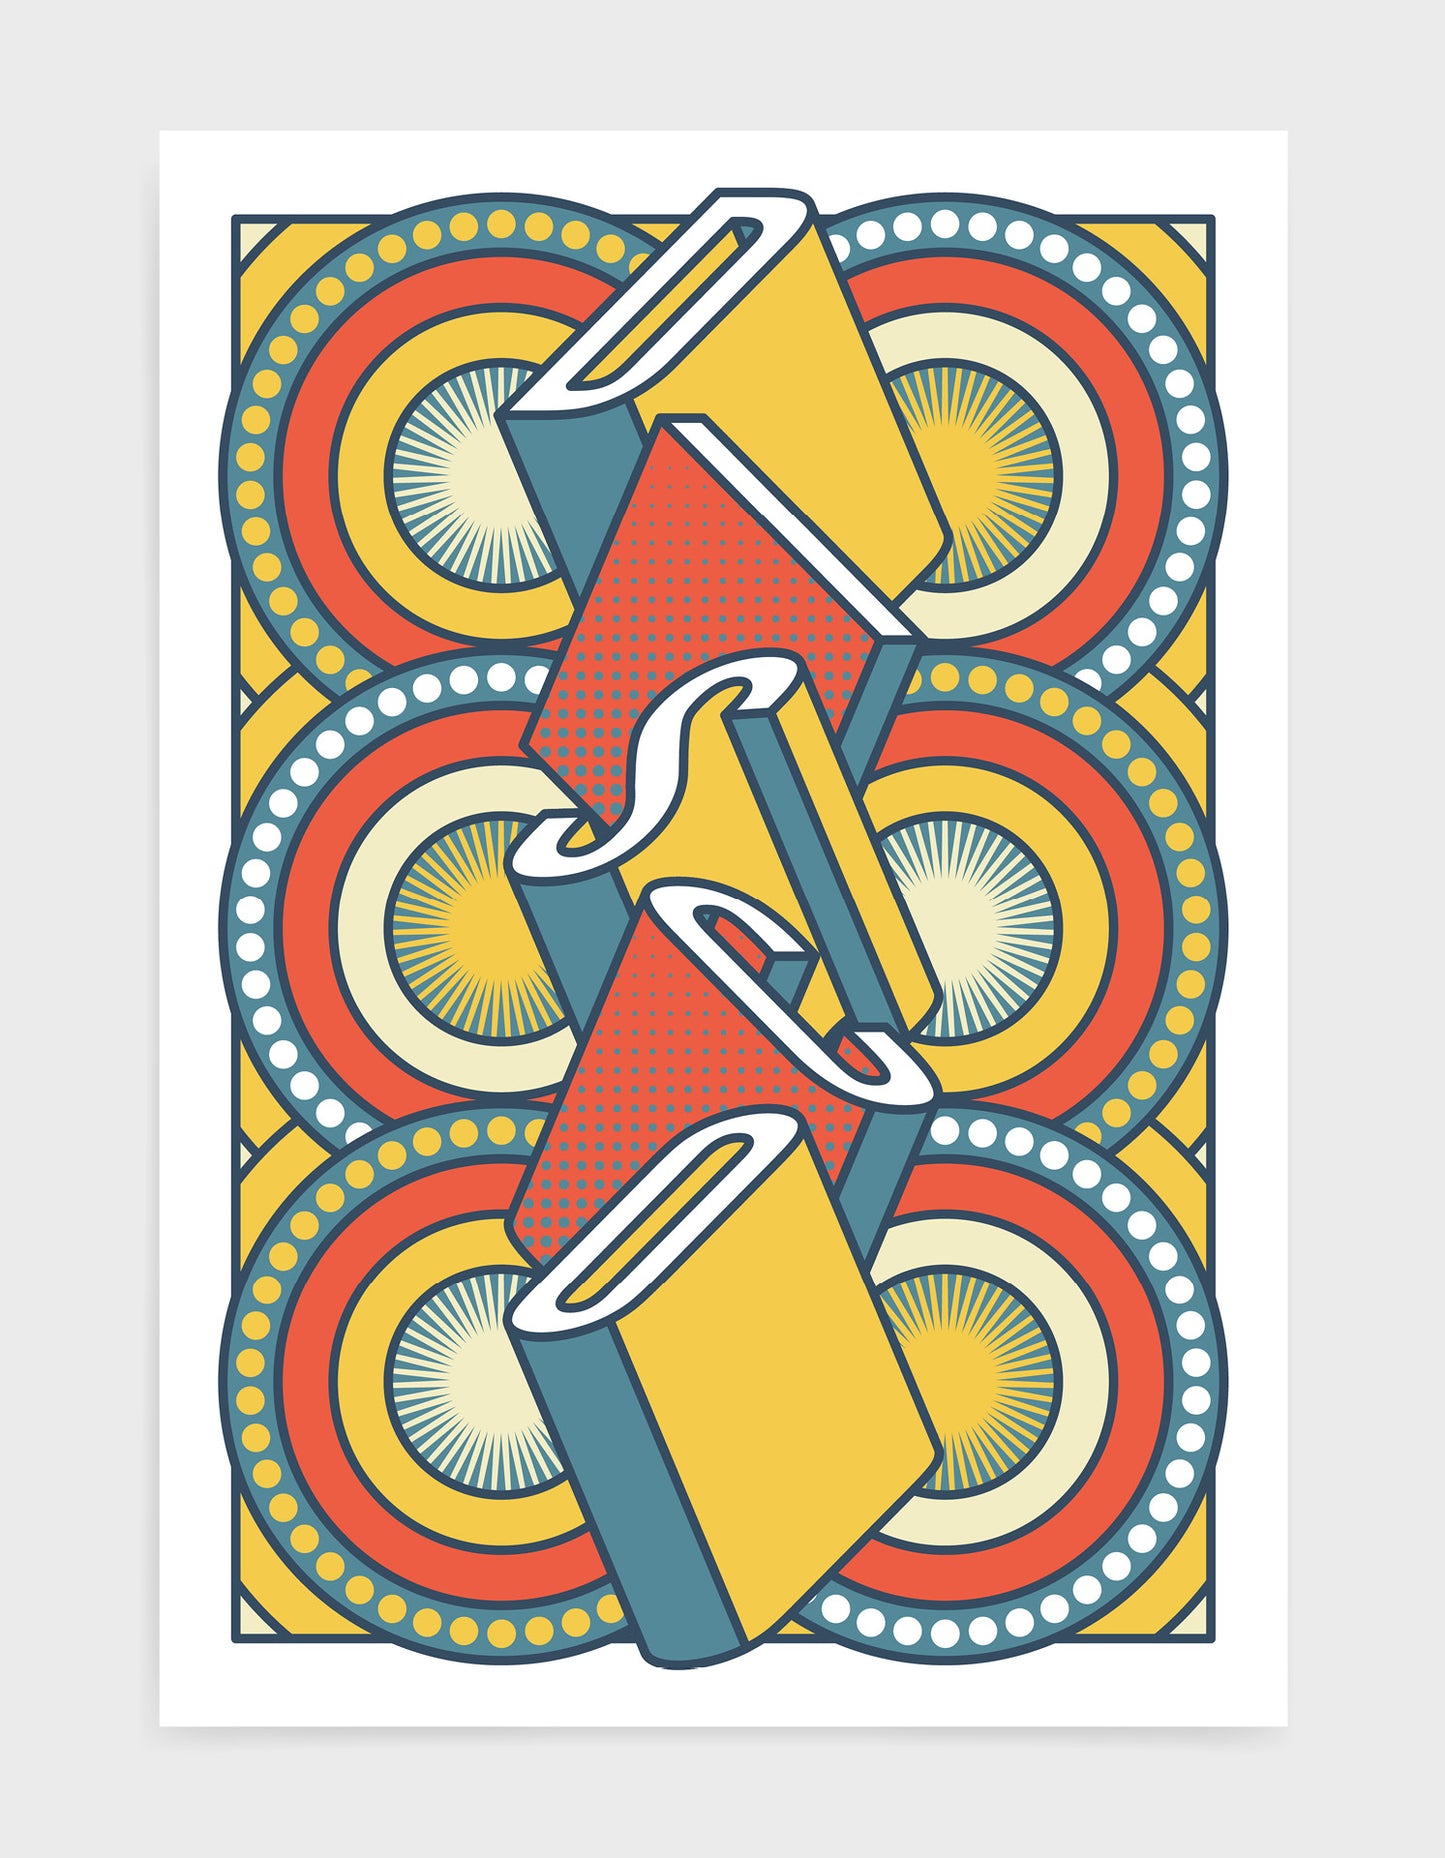 disco music art print featuring a geometric abstract pattern in bold shapes and orange and blue colours. Block typography depicts the word disco in tumbling text